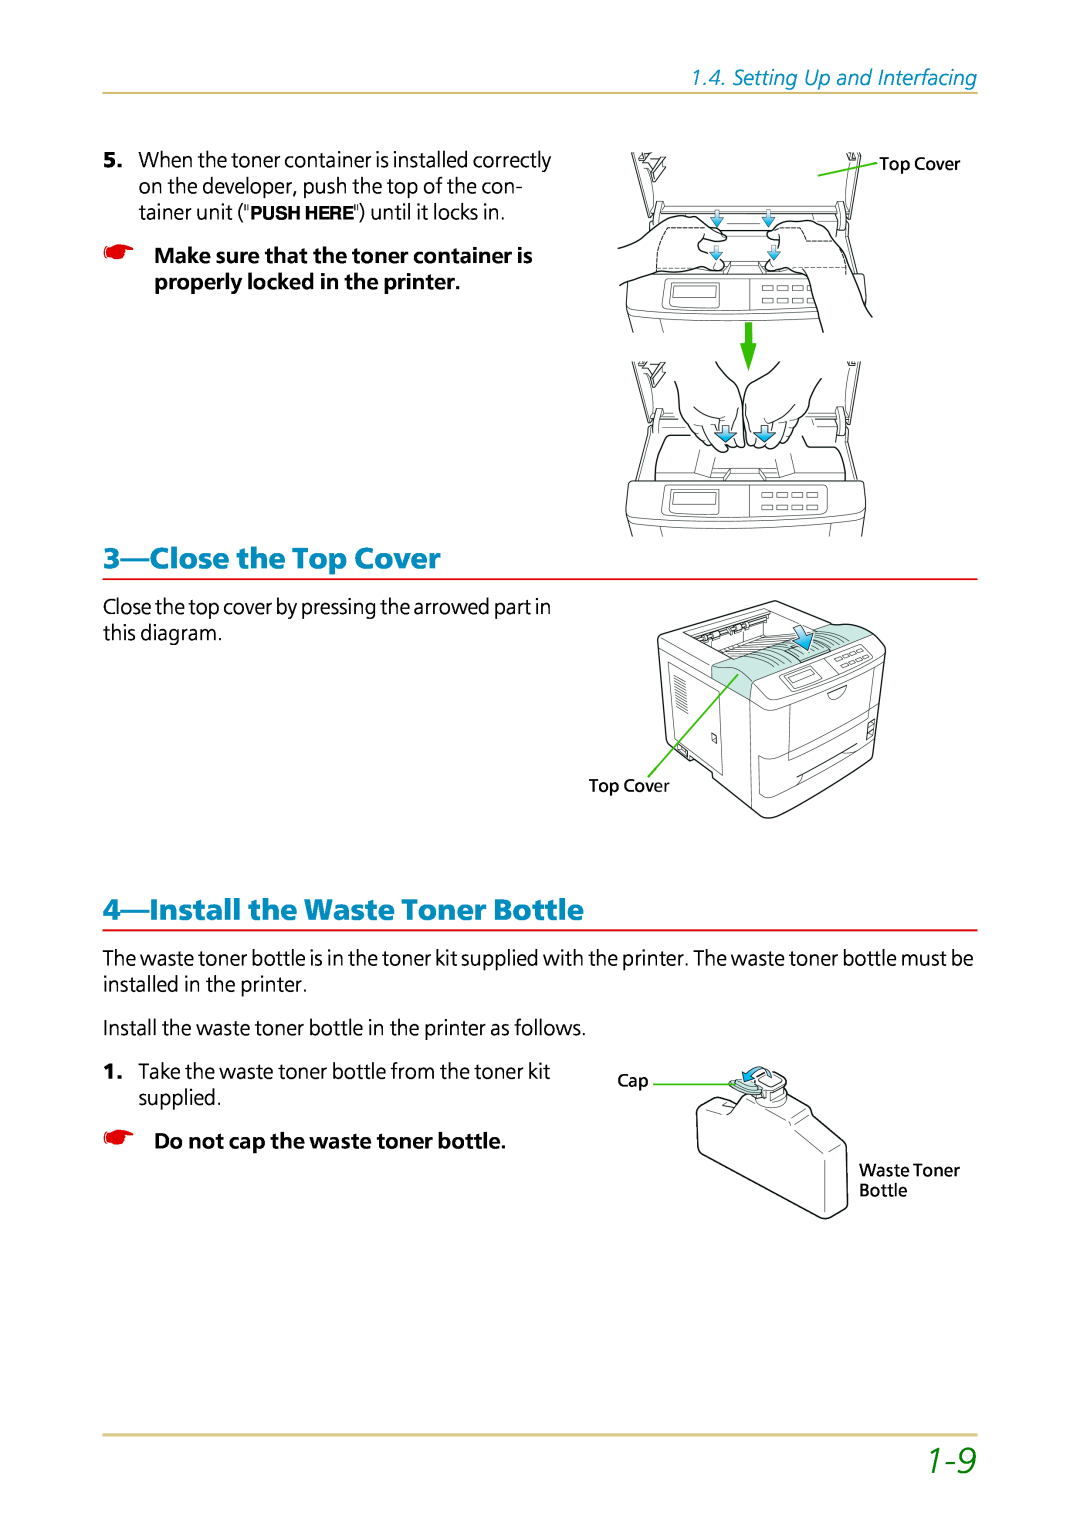 Kyocera FS-1700 user manual 3—Closethe Top Cover, 4—Installthe Waste Toner Bottle, Setting Up and Interfacing 